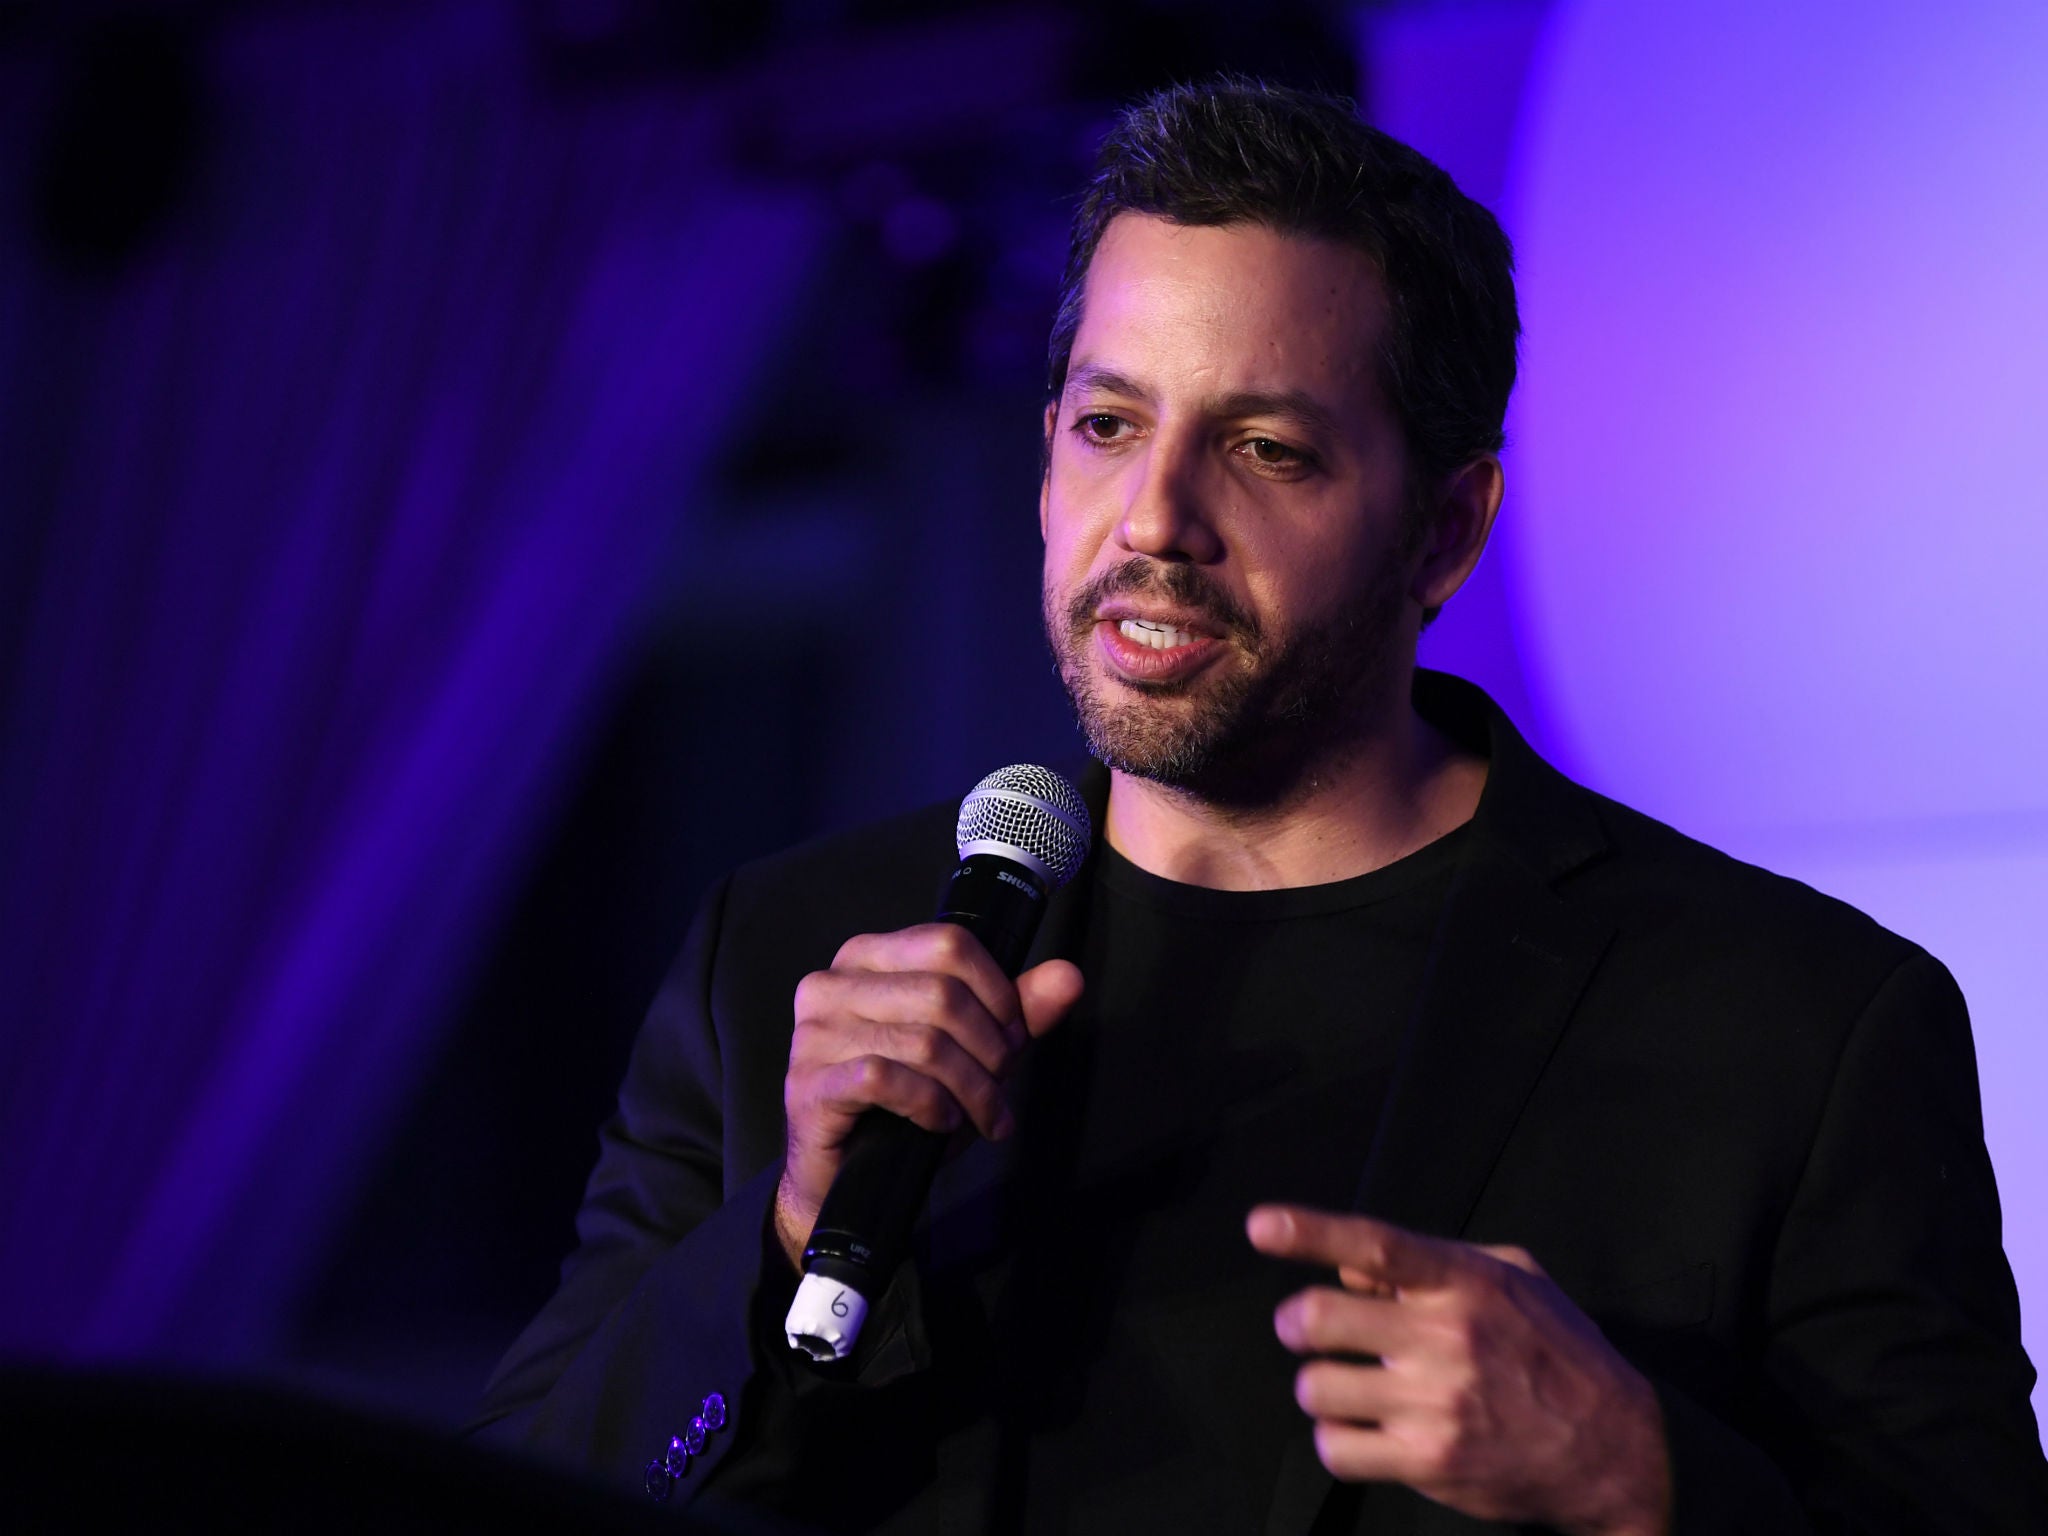 David Blaine allegations: NYPD investigating magician over accusations he sexually assaulted at least two women